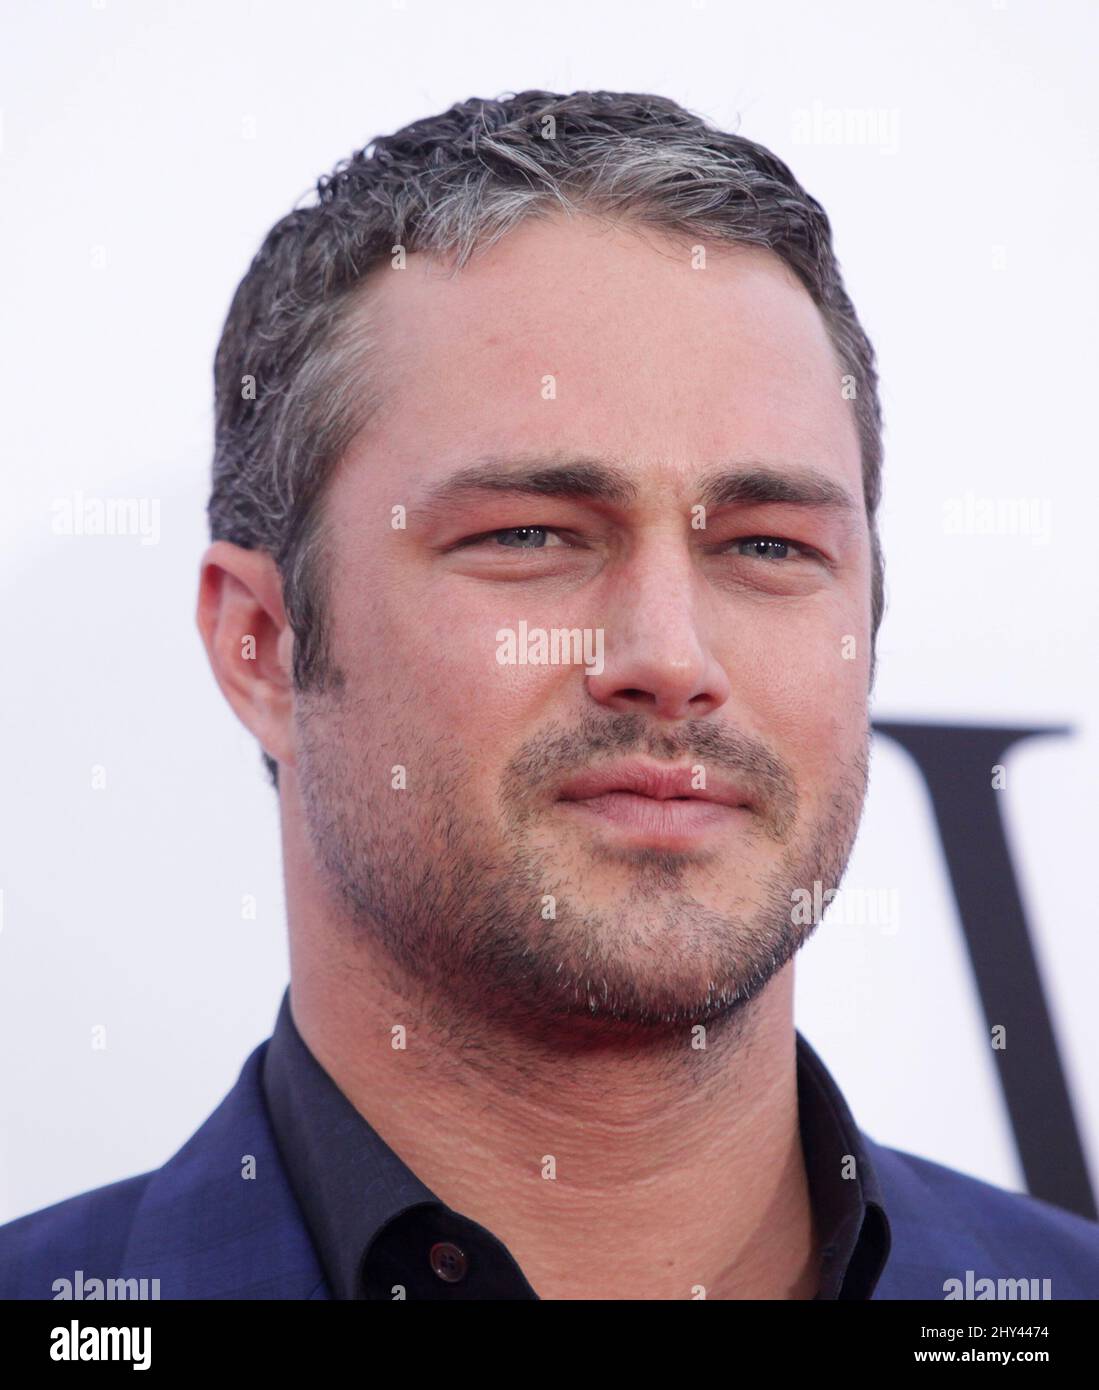 Taylor Kinney arriving for the premiere of The Other Woman held at the Regency Village Theater in Los Angeles. Stock Photo